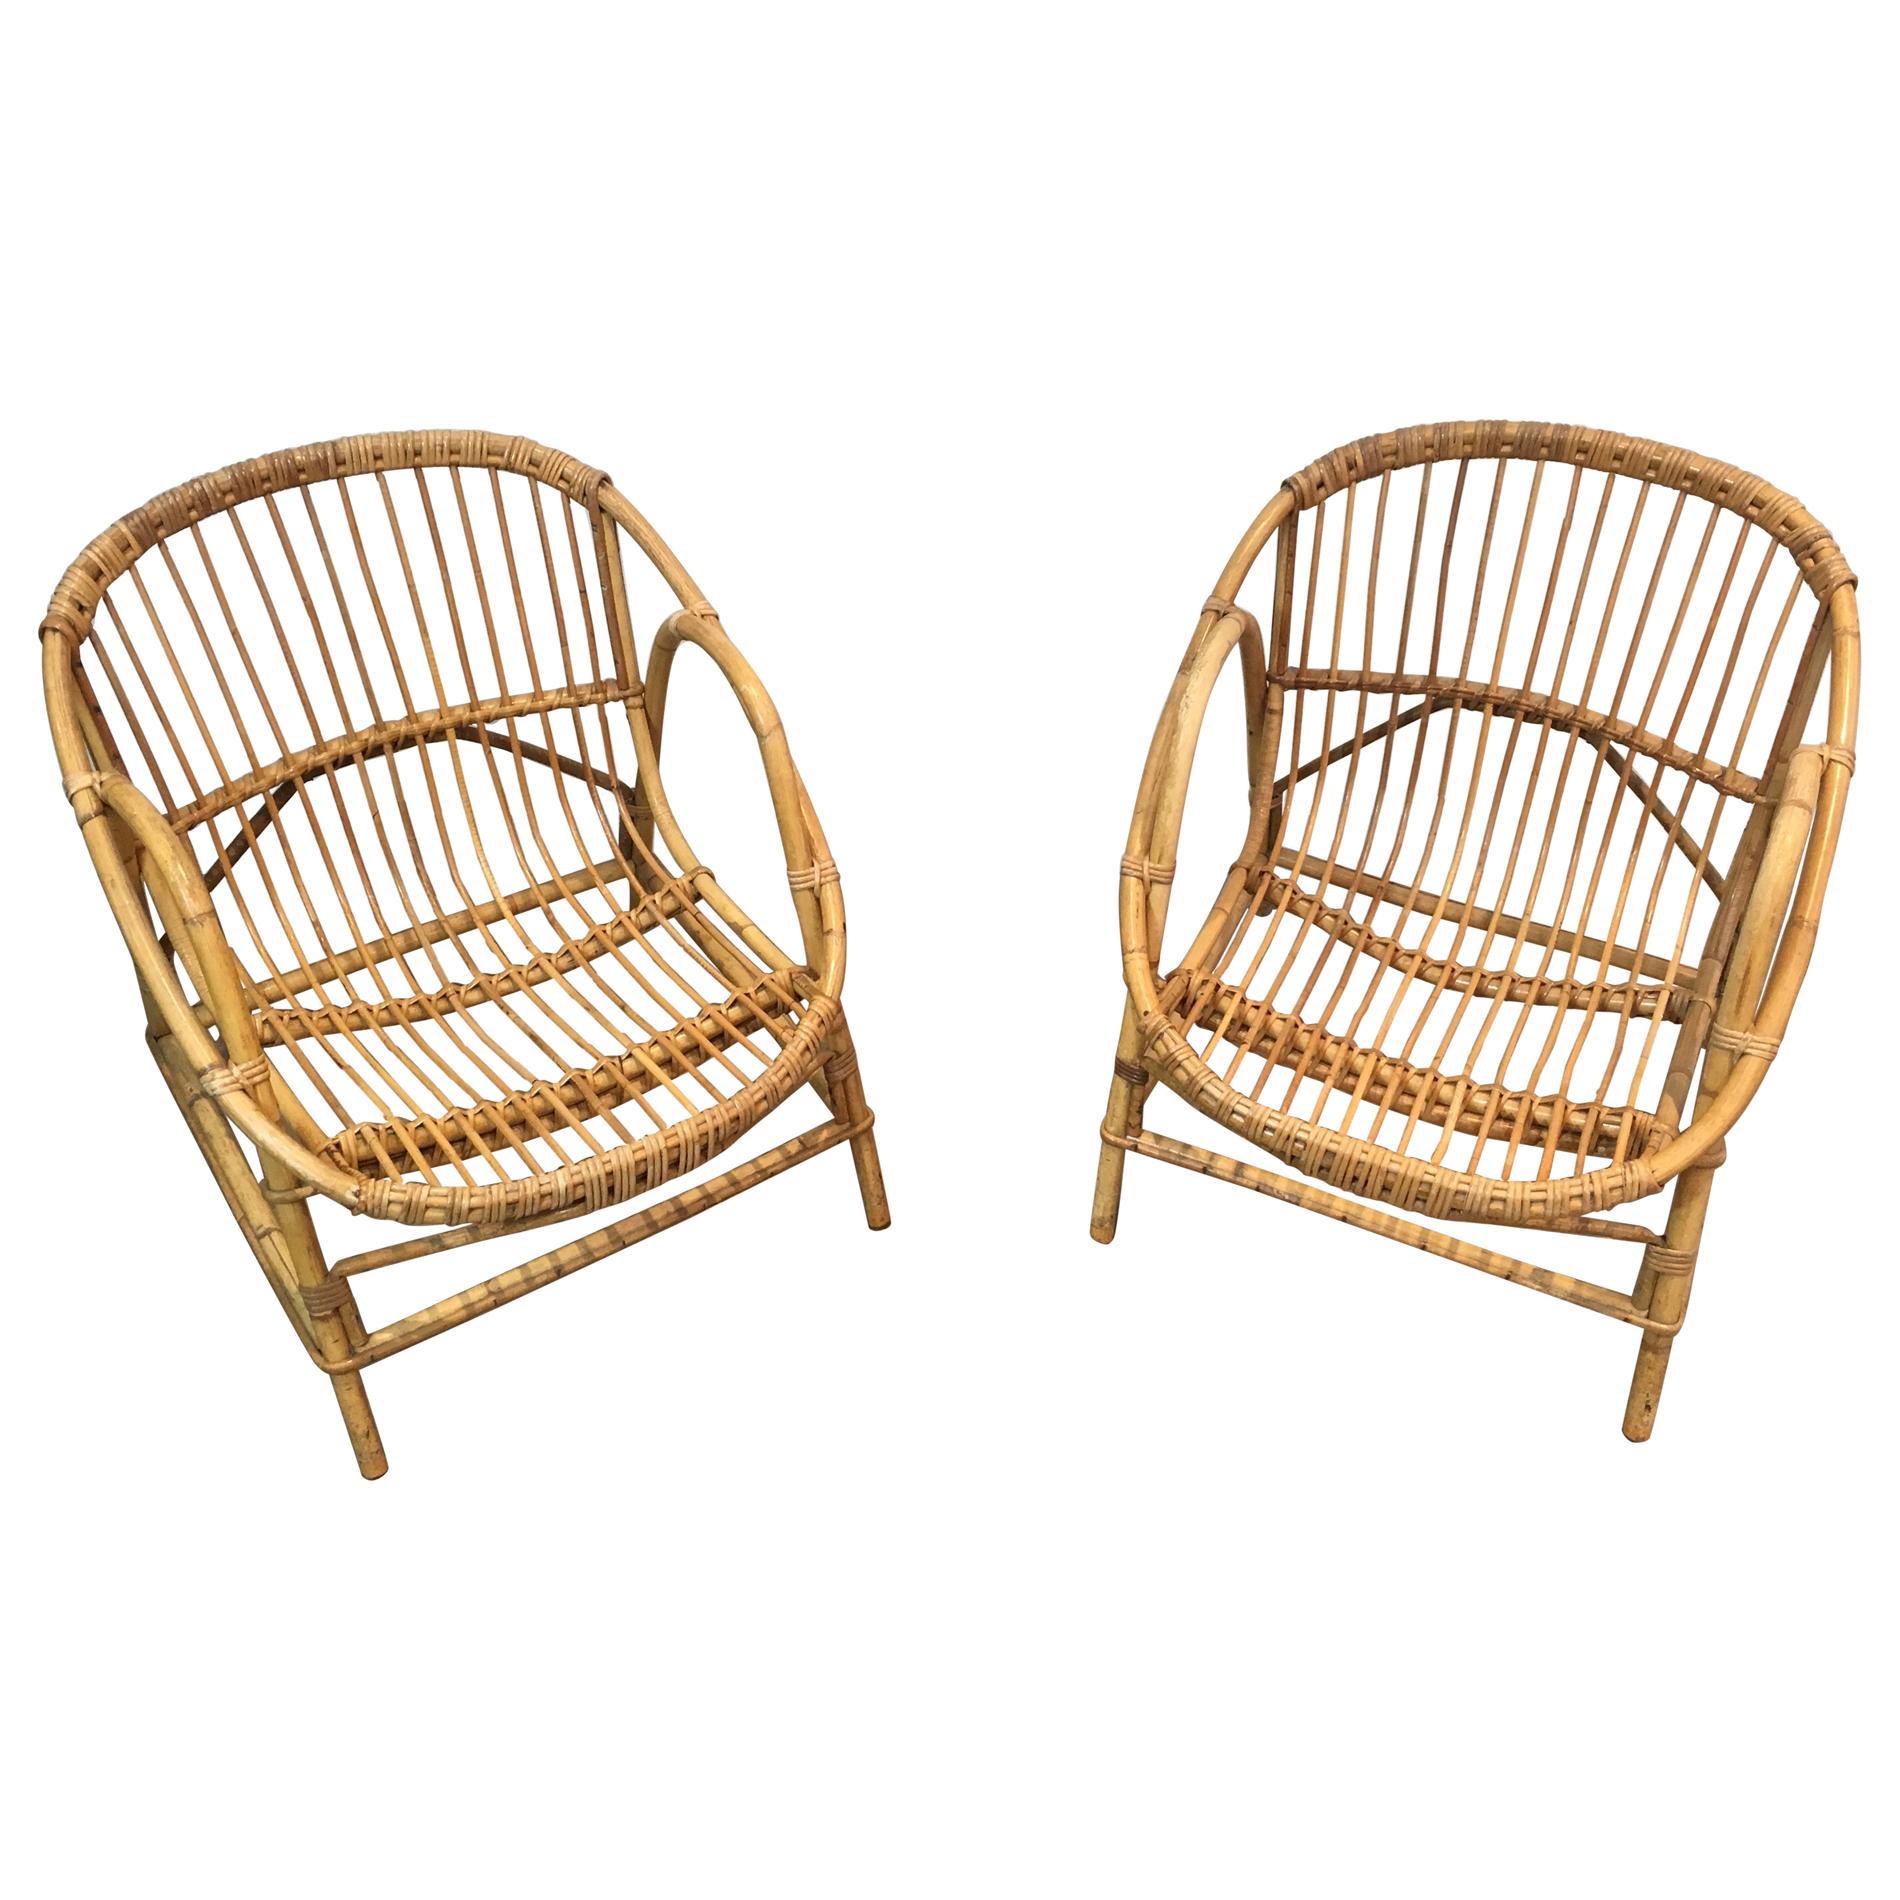 Pair of Decorative Rattan Armchairs, French, circa 1970